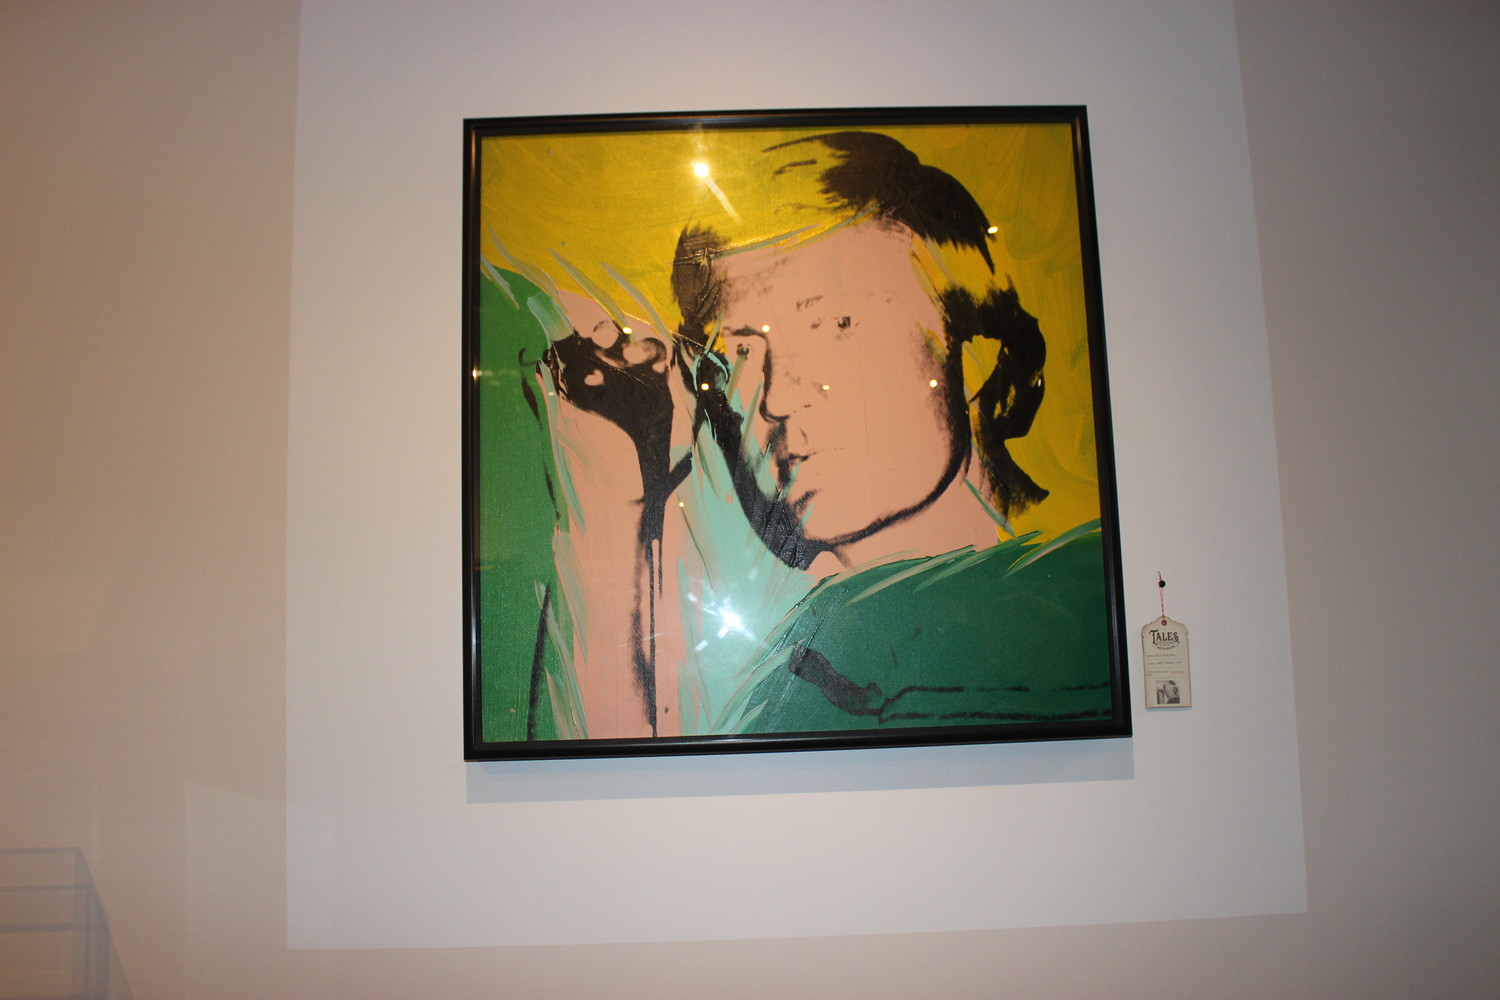 The new exhibit features an original Andy Warhol painting of the Golden Bear, Jack Nicklaus.